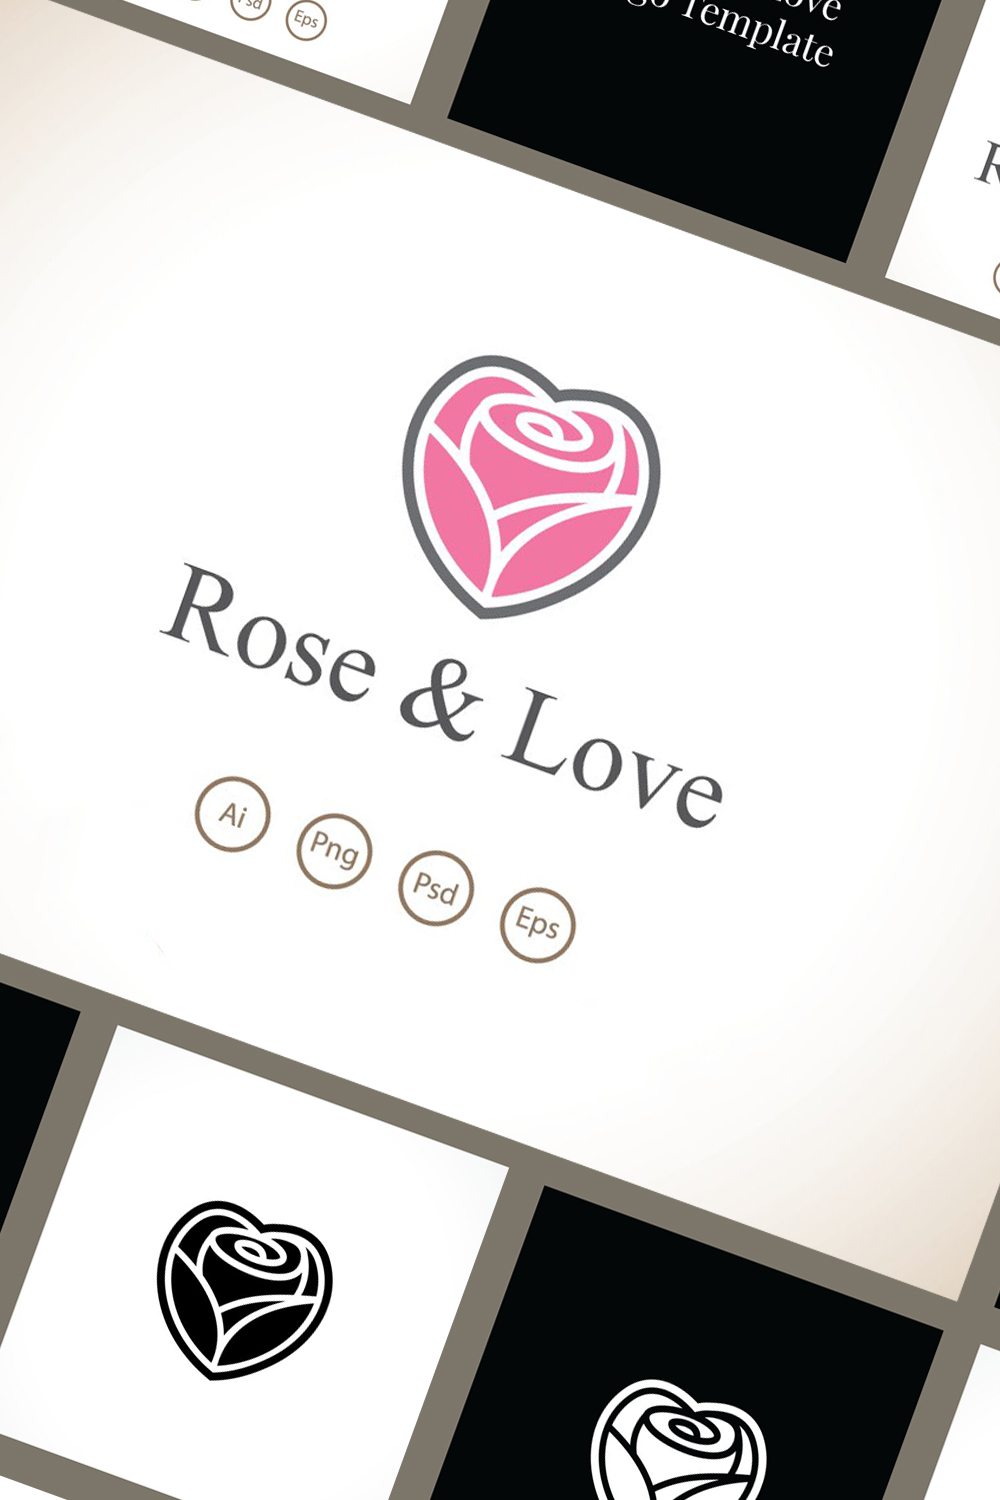 Rose and love logo template of pinterest.